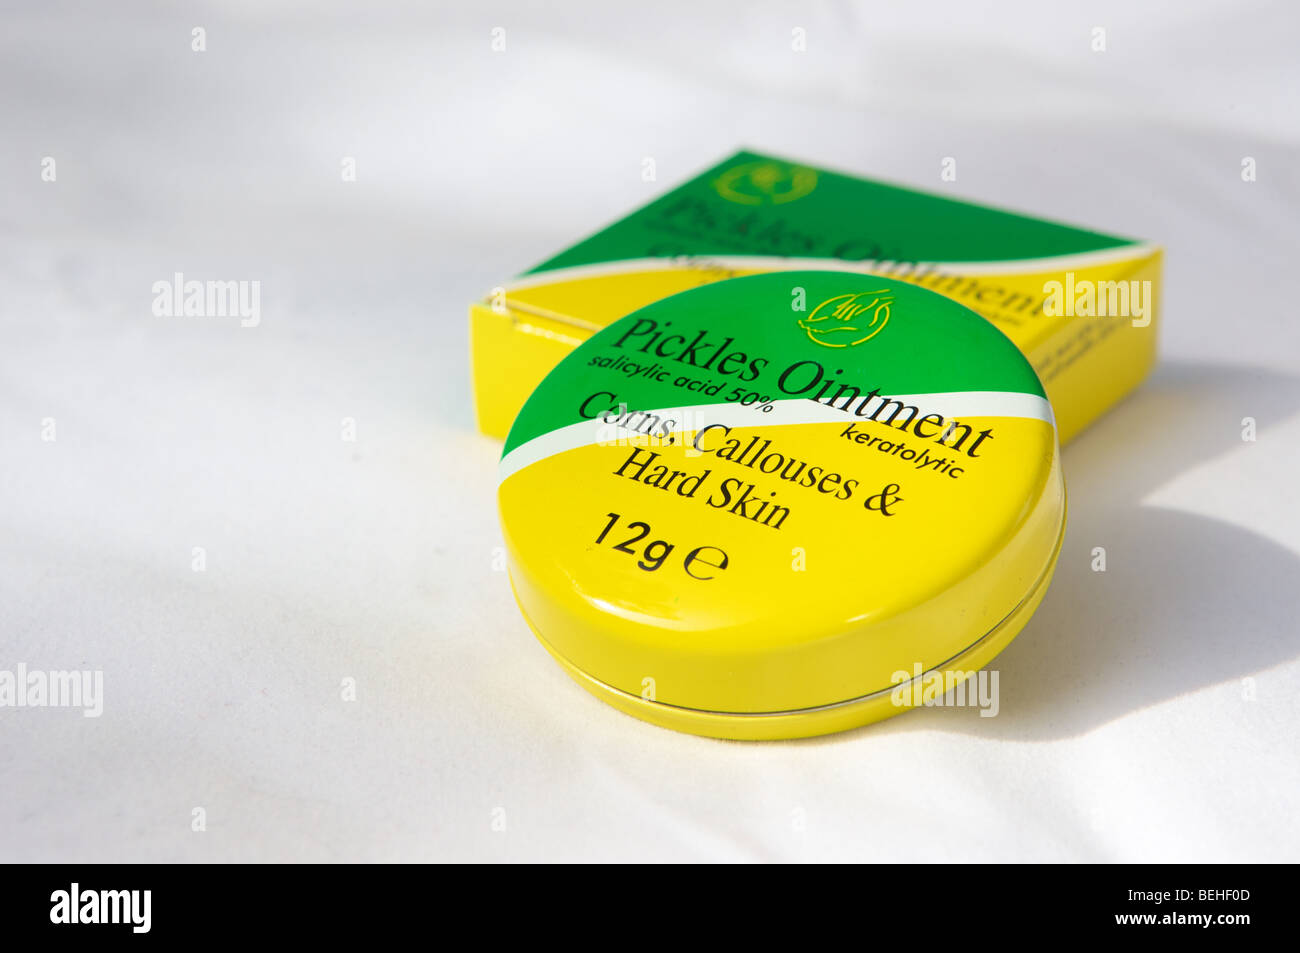 Pickles Ointment Stock Photo